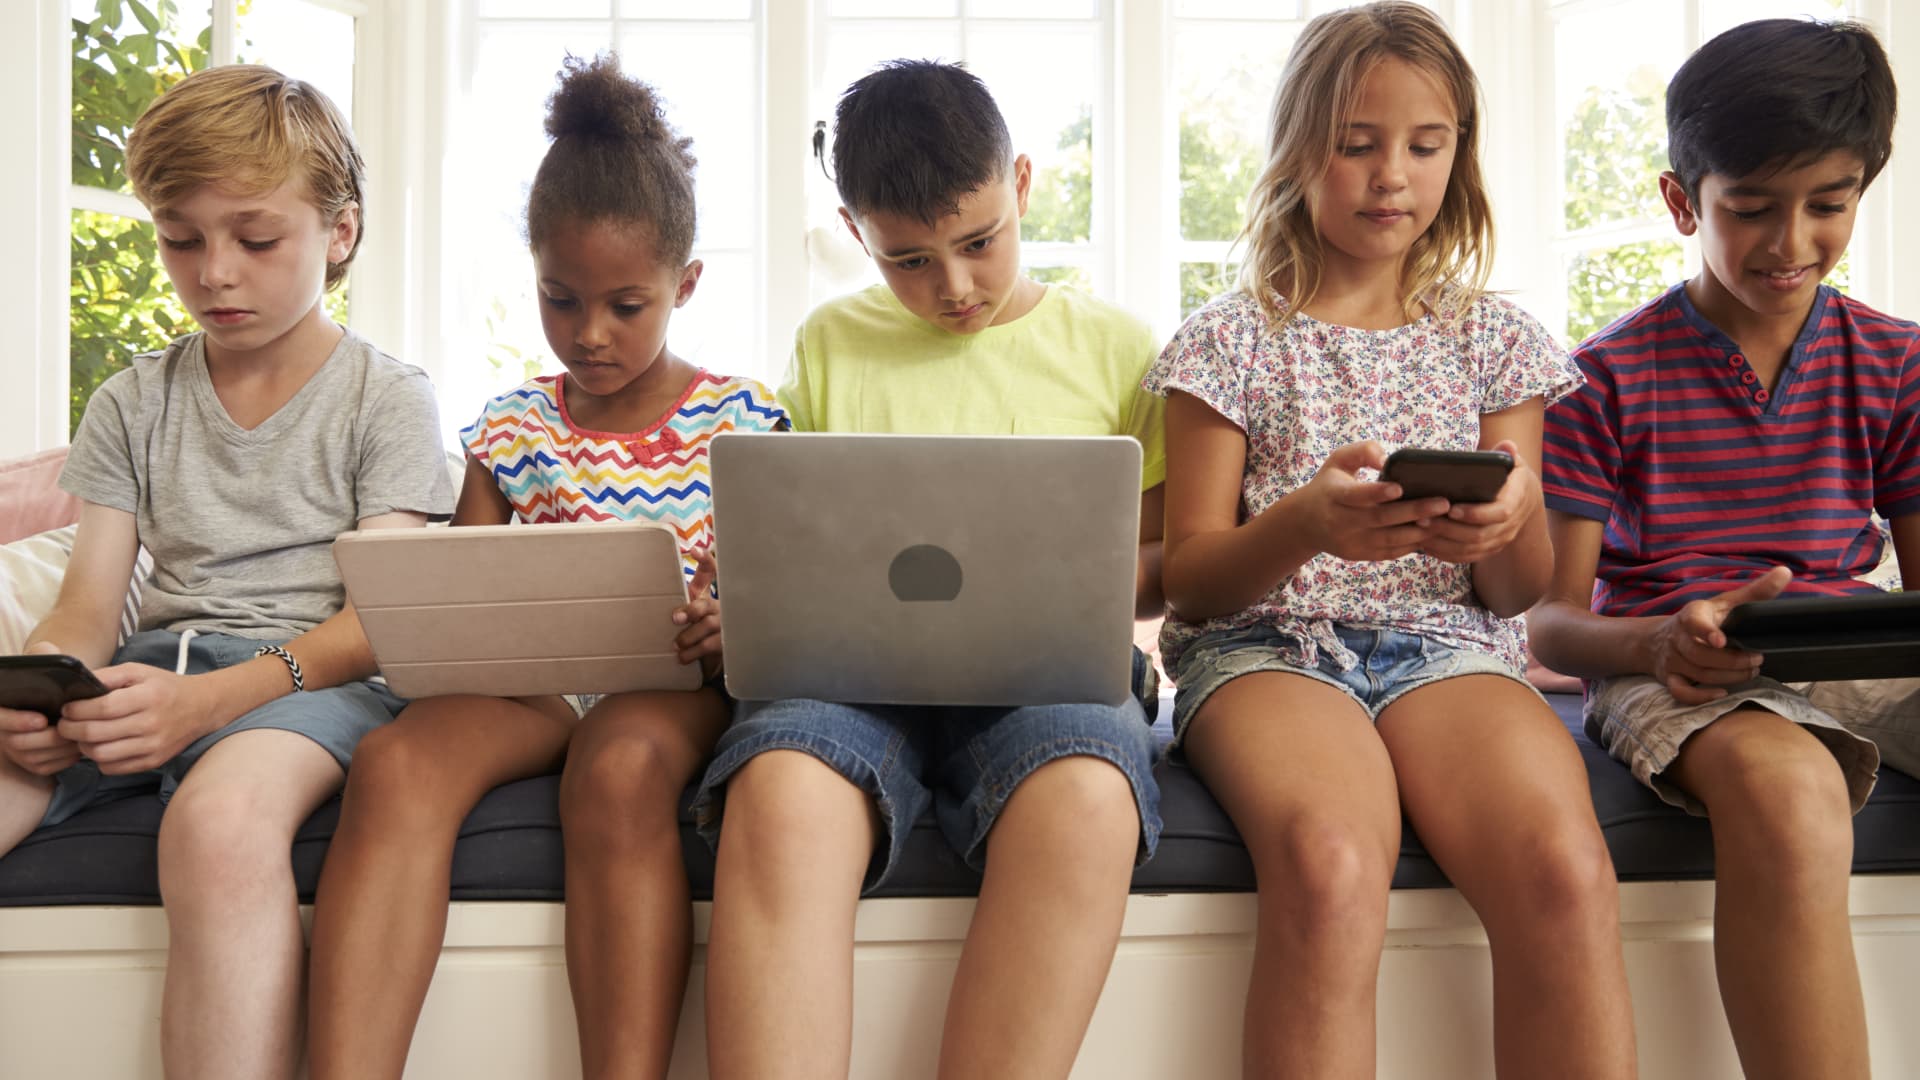 Morgan Stanley on LinkedIn: Children and the Internet: A Comprehensive Look